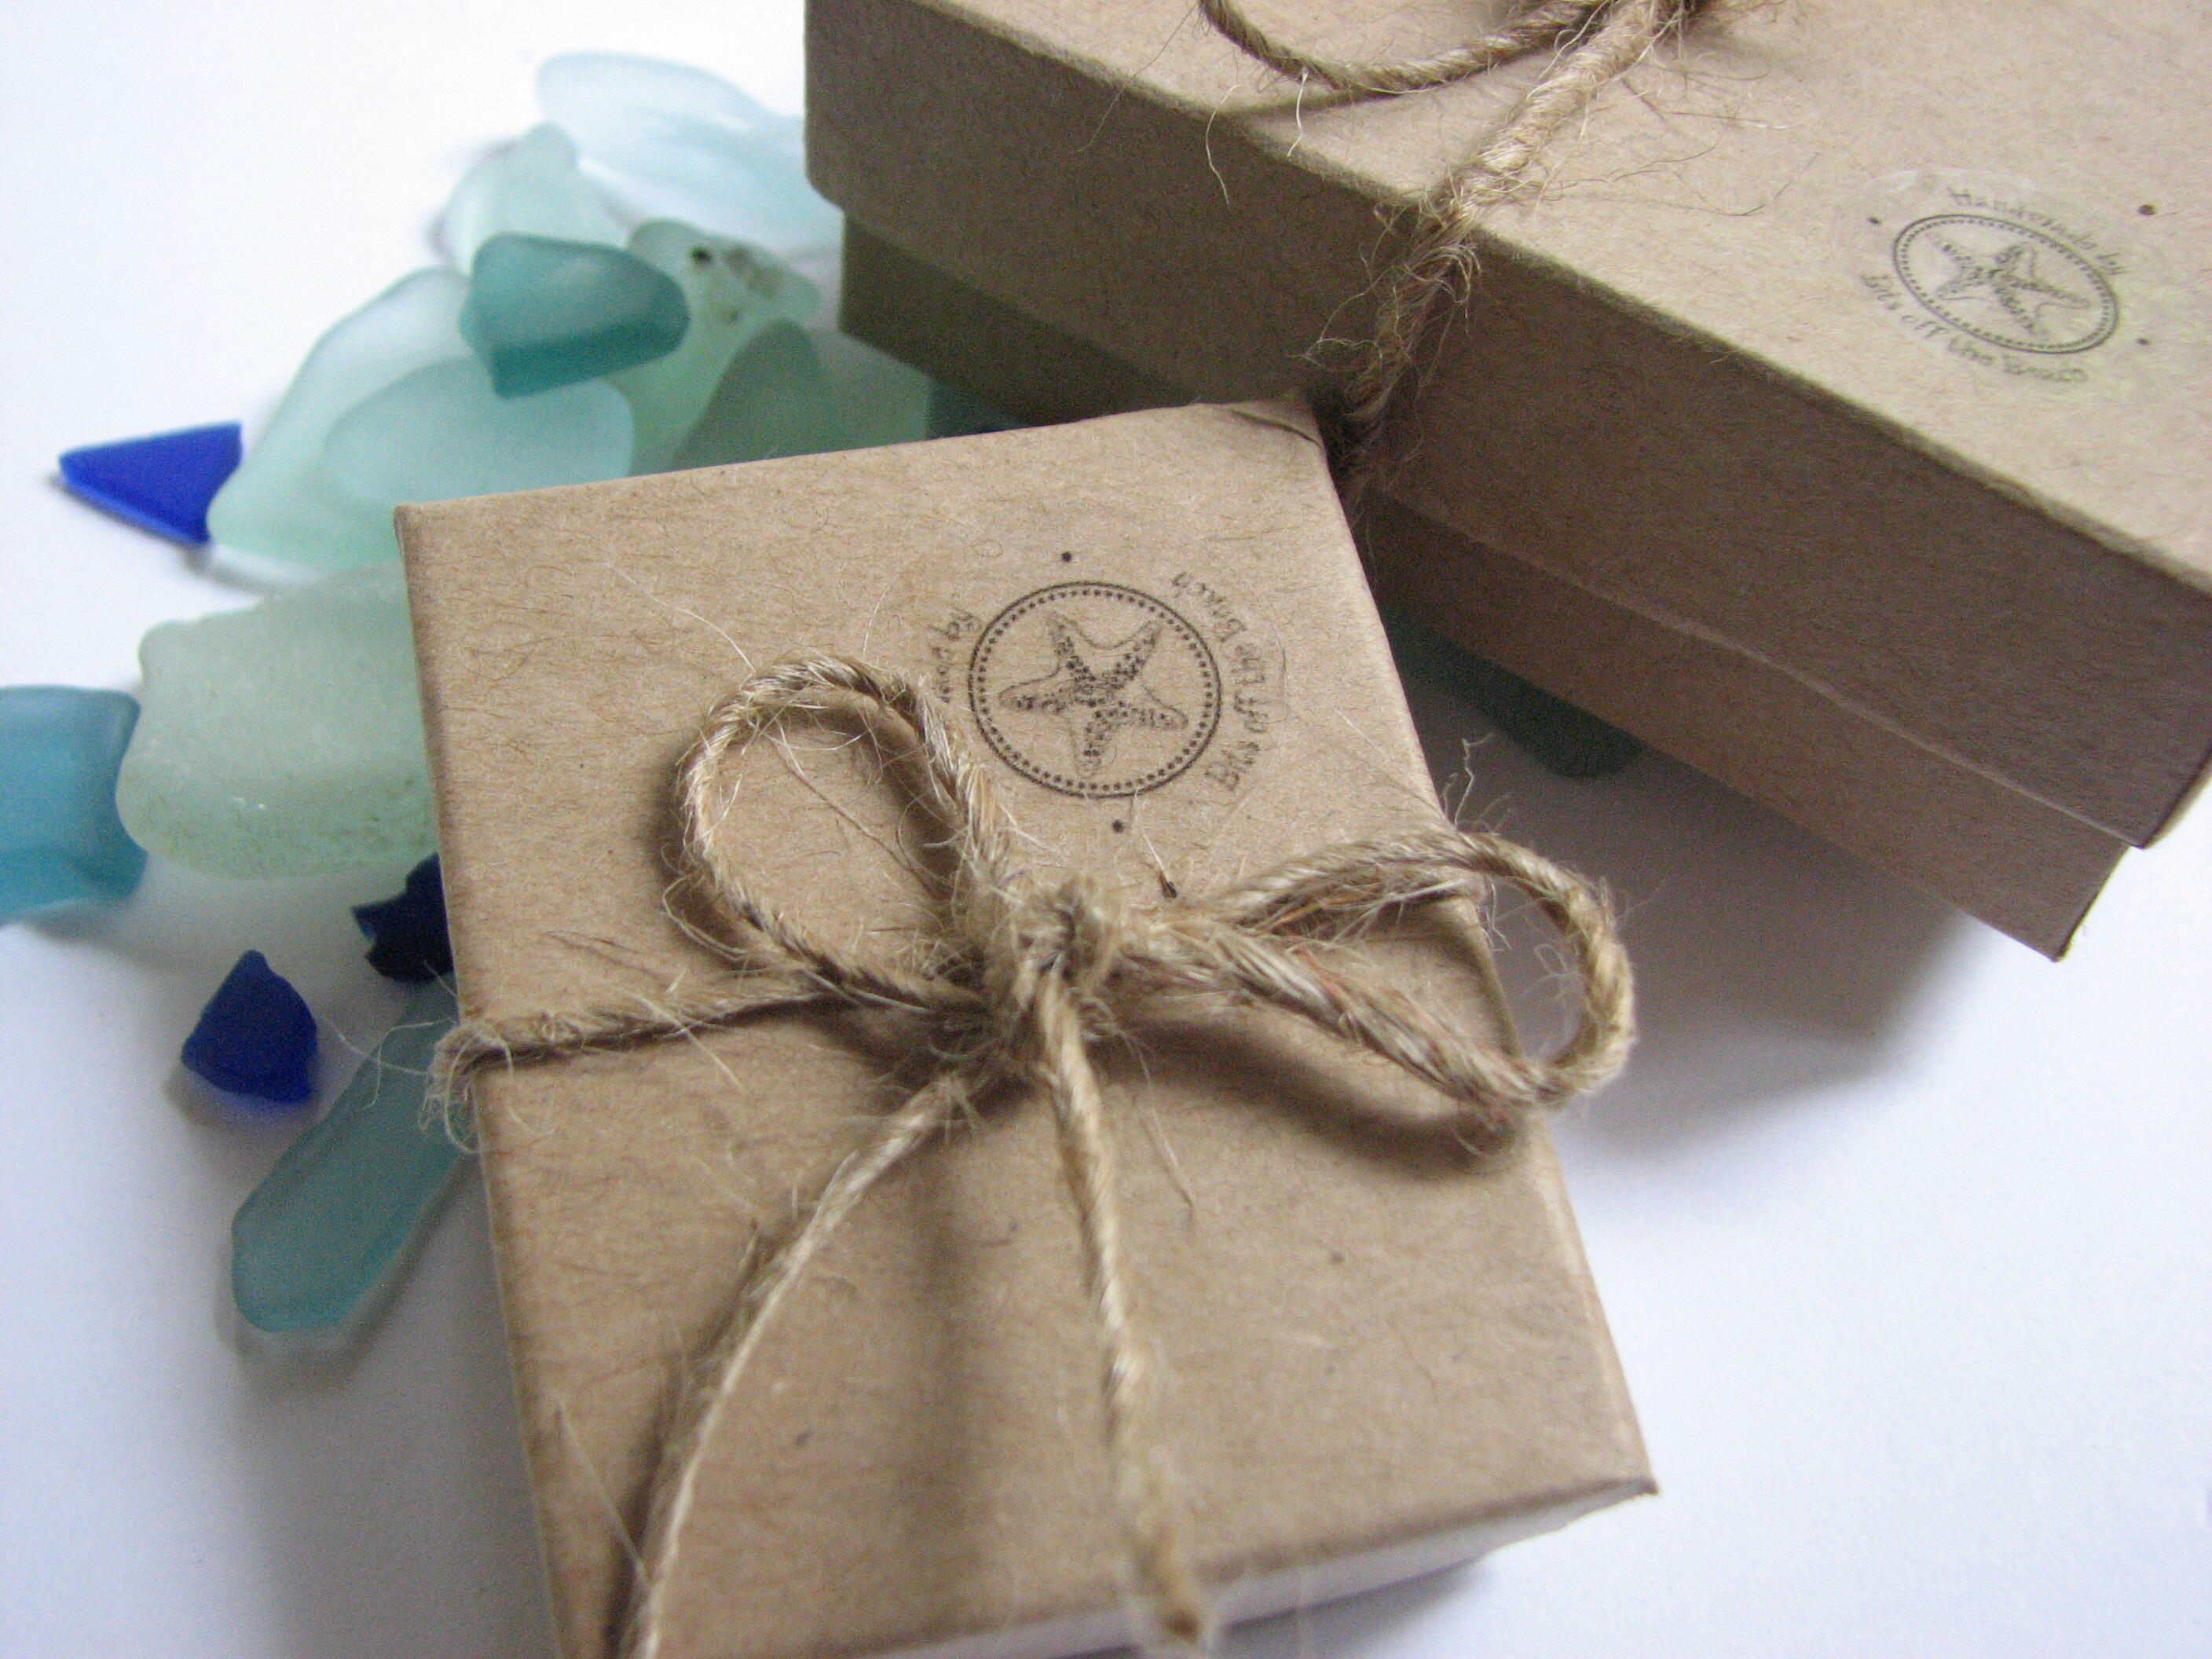 Each order comes packed in a eco friendly gift box